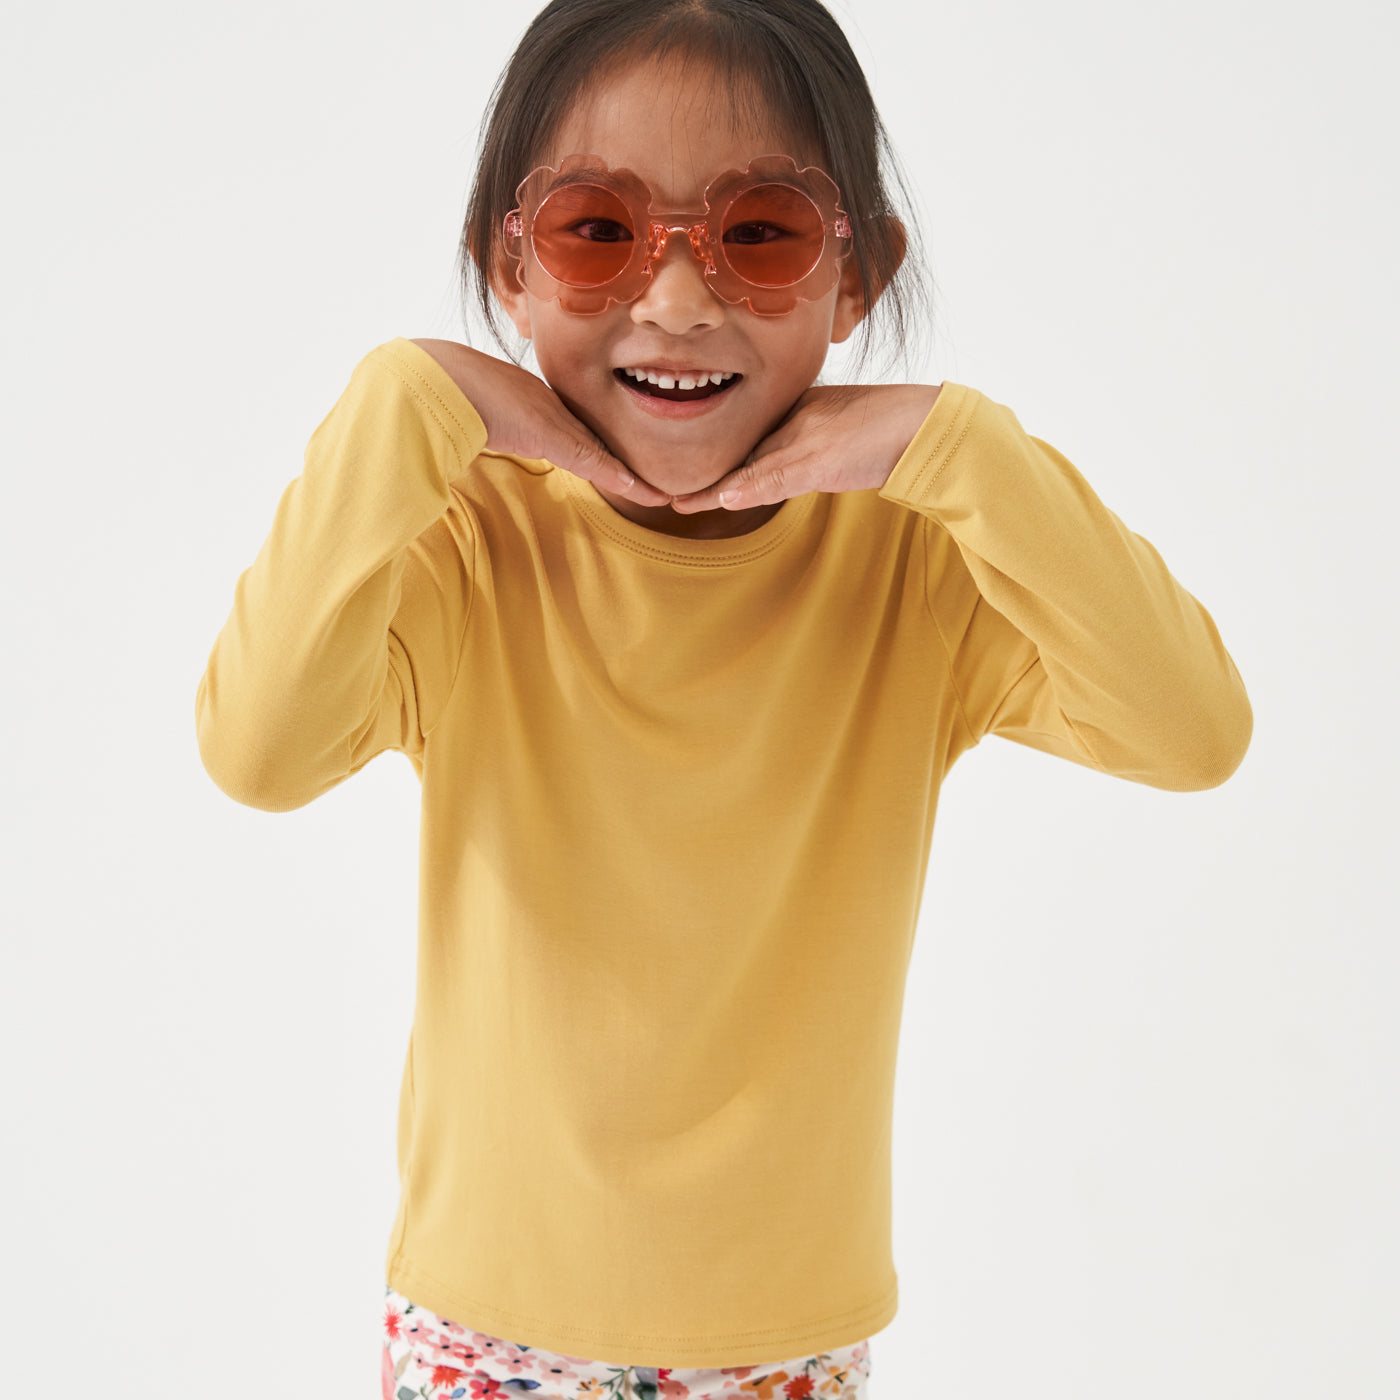 Child with sunglasses on wearing a Honey classic tee